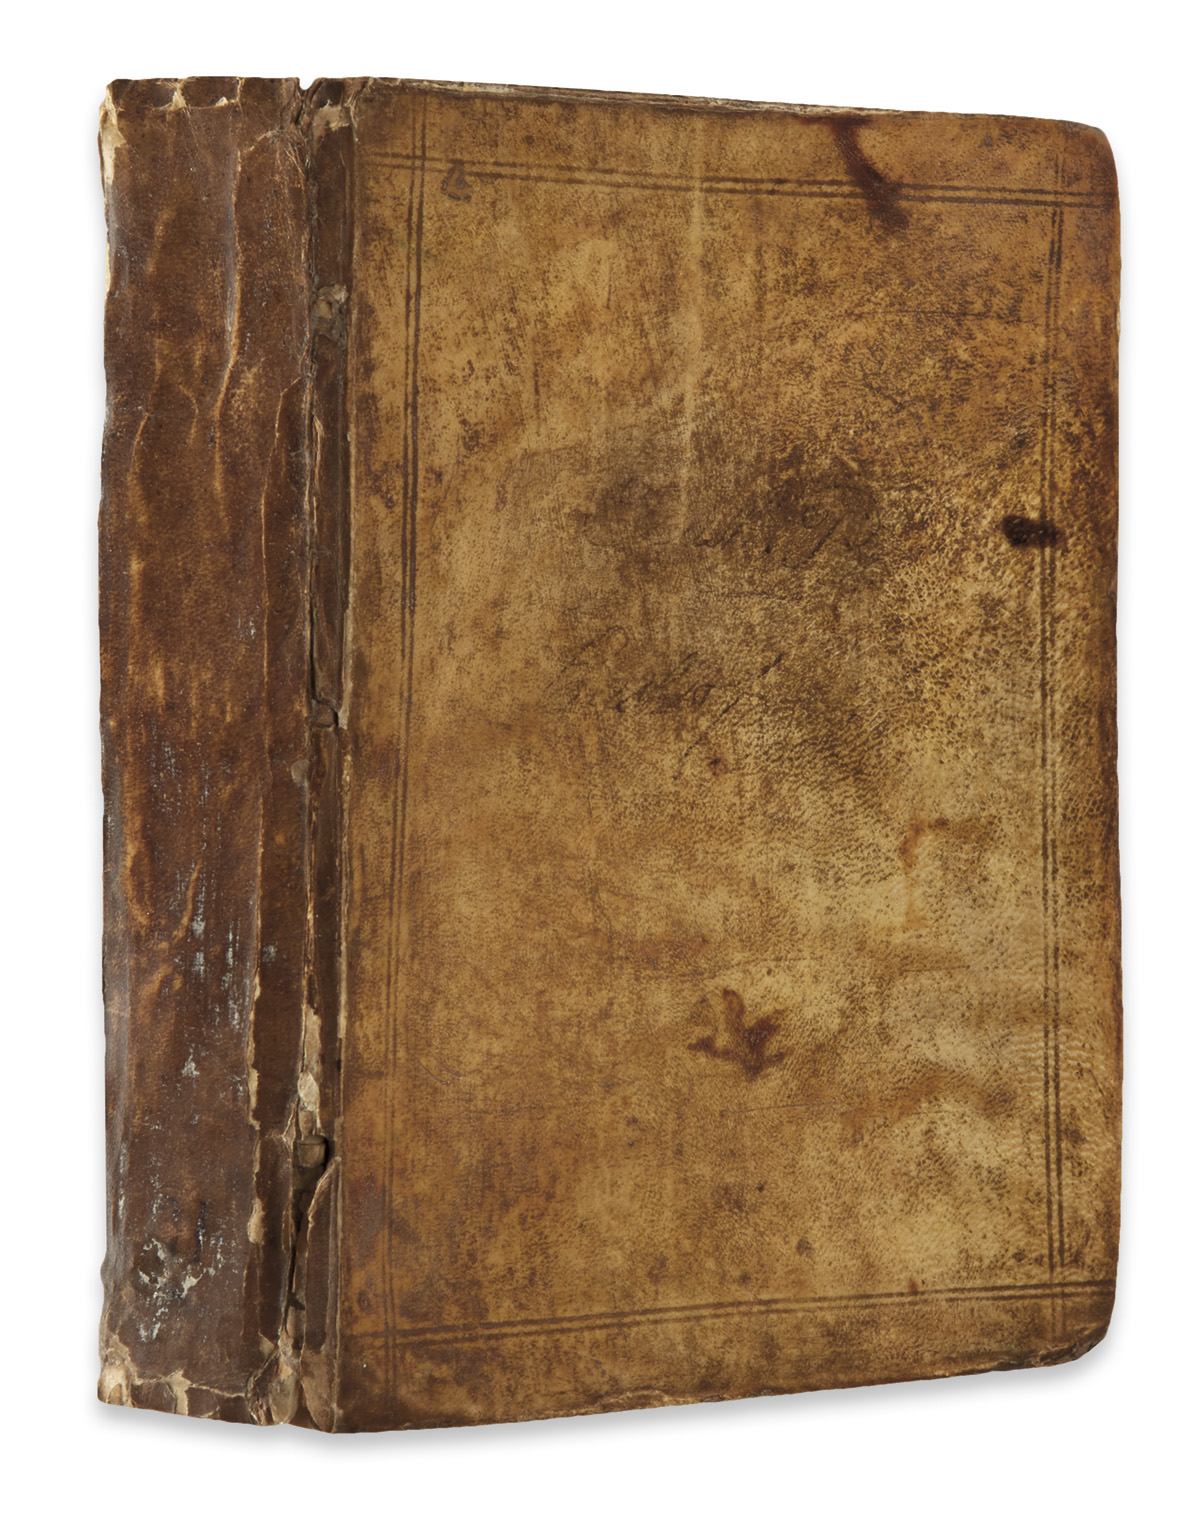 COOKERY.  Manuscript recipe book in English.  18th-early 19th century.